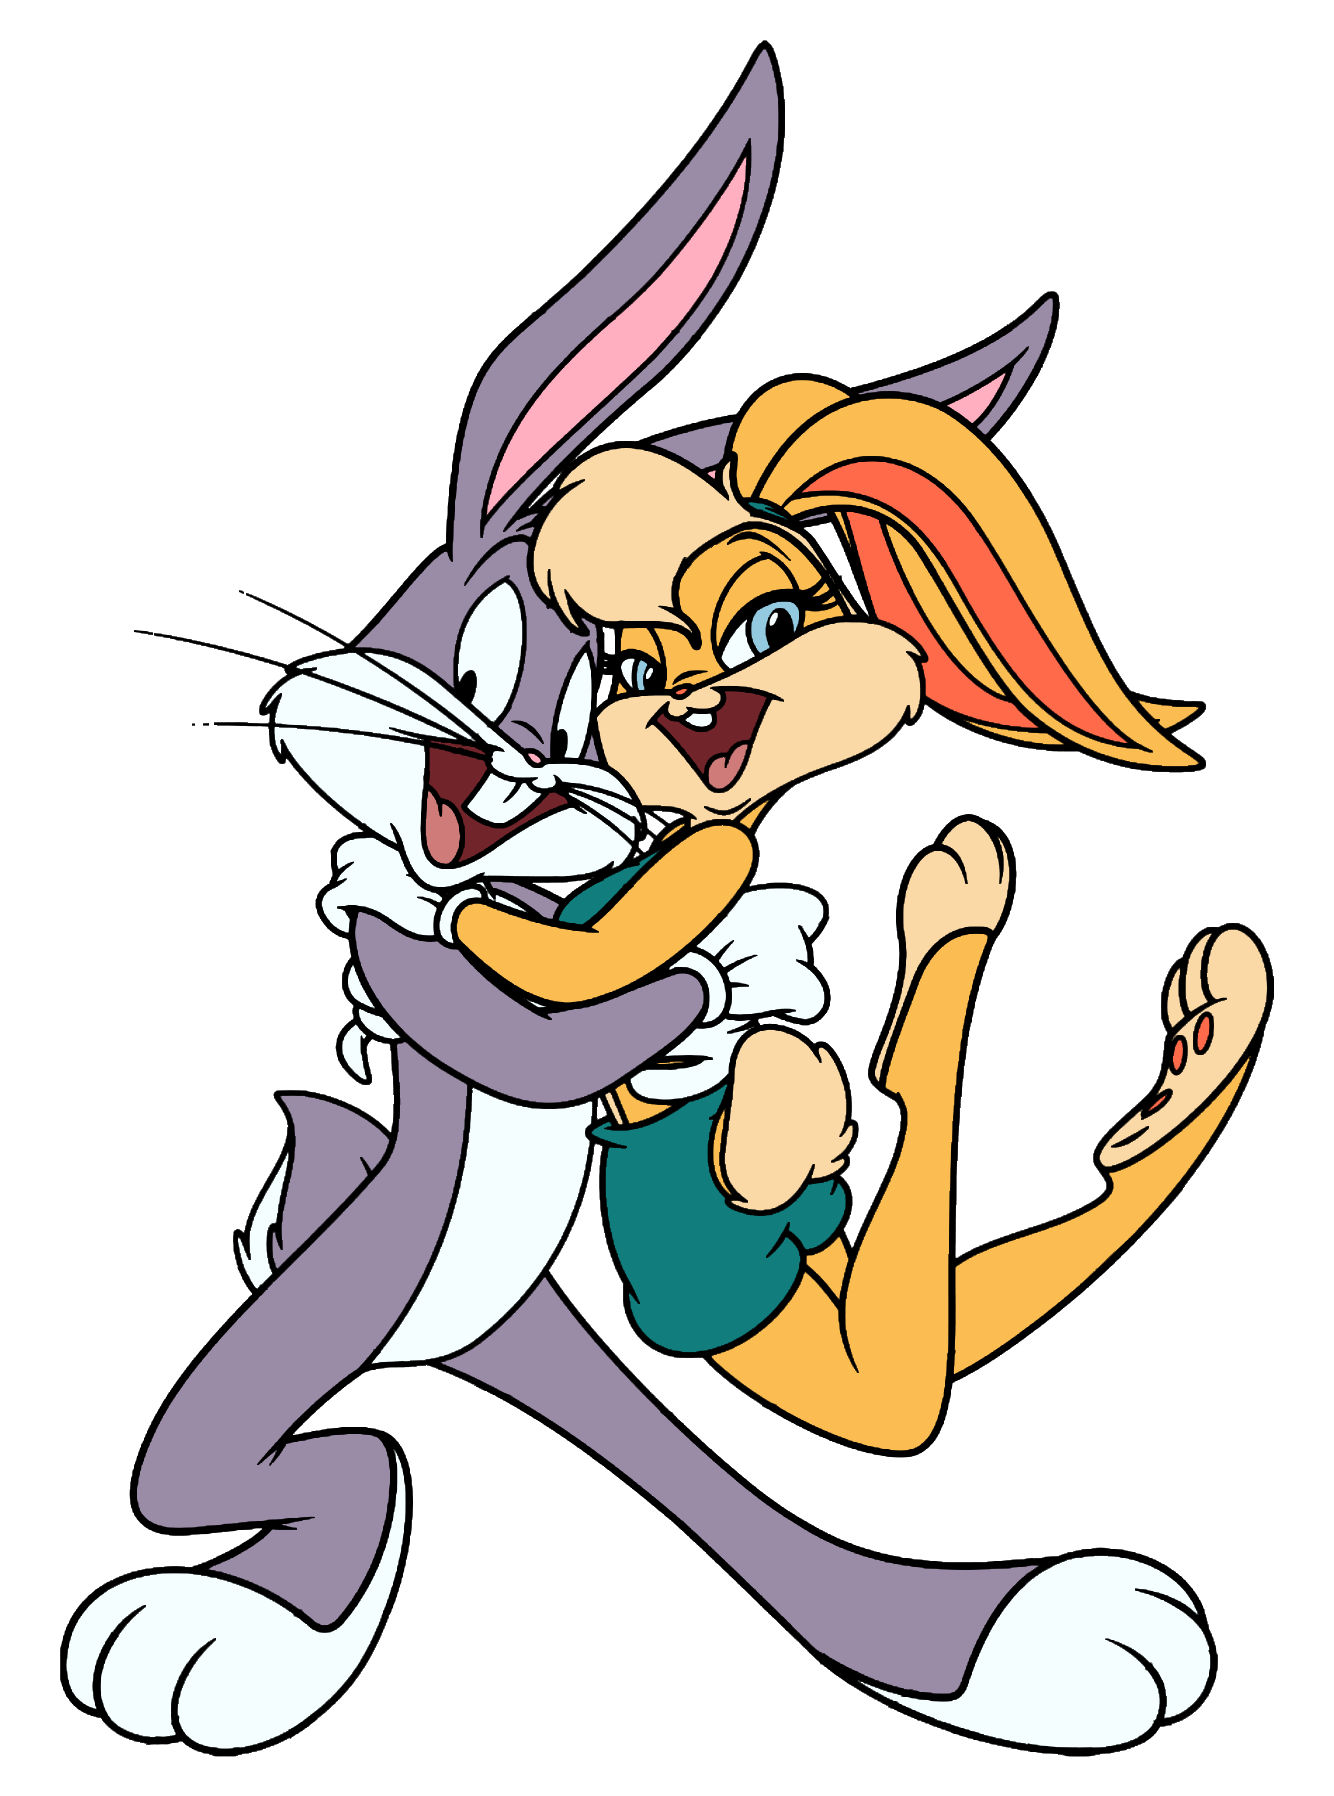 Images for Lola Bunny.